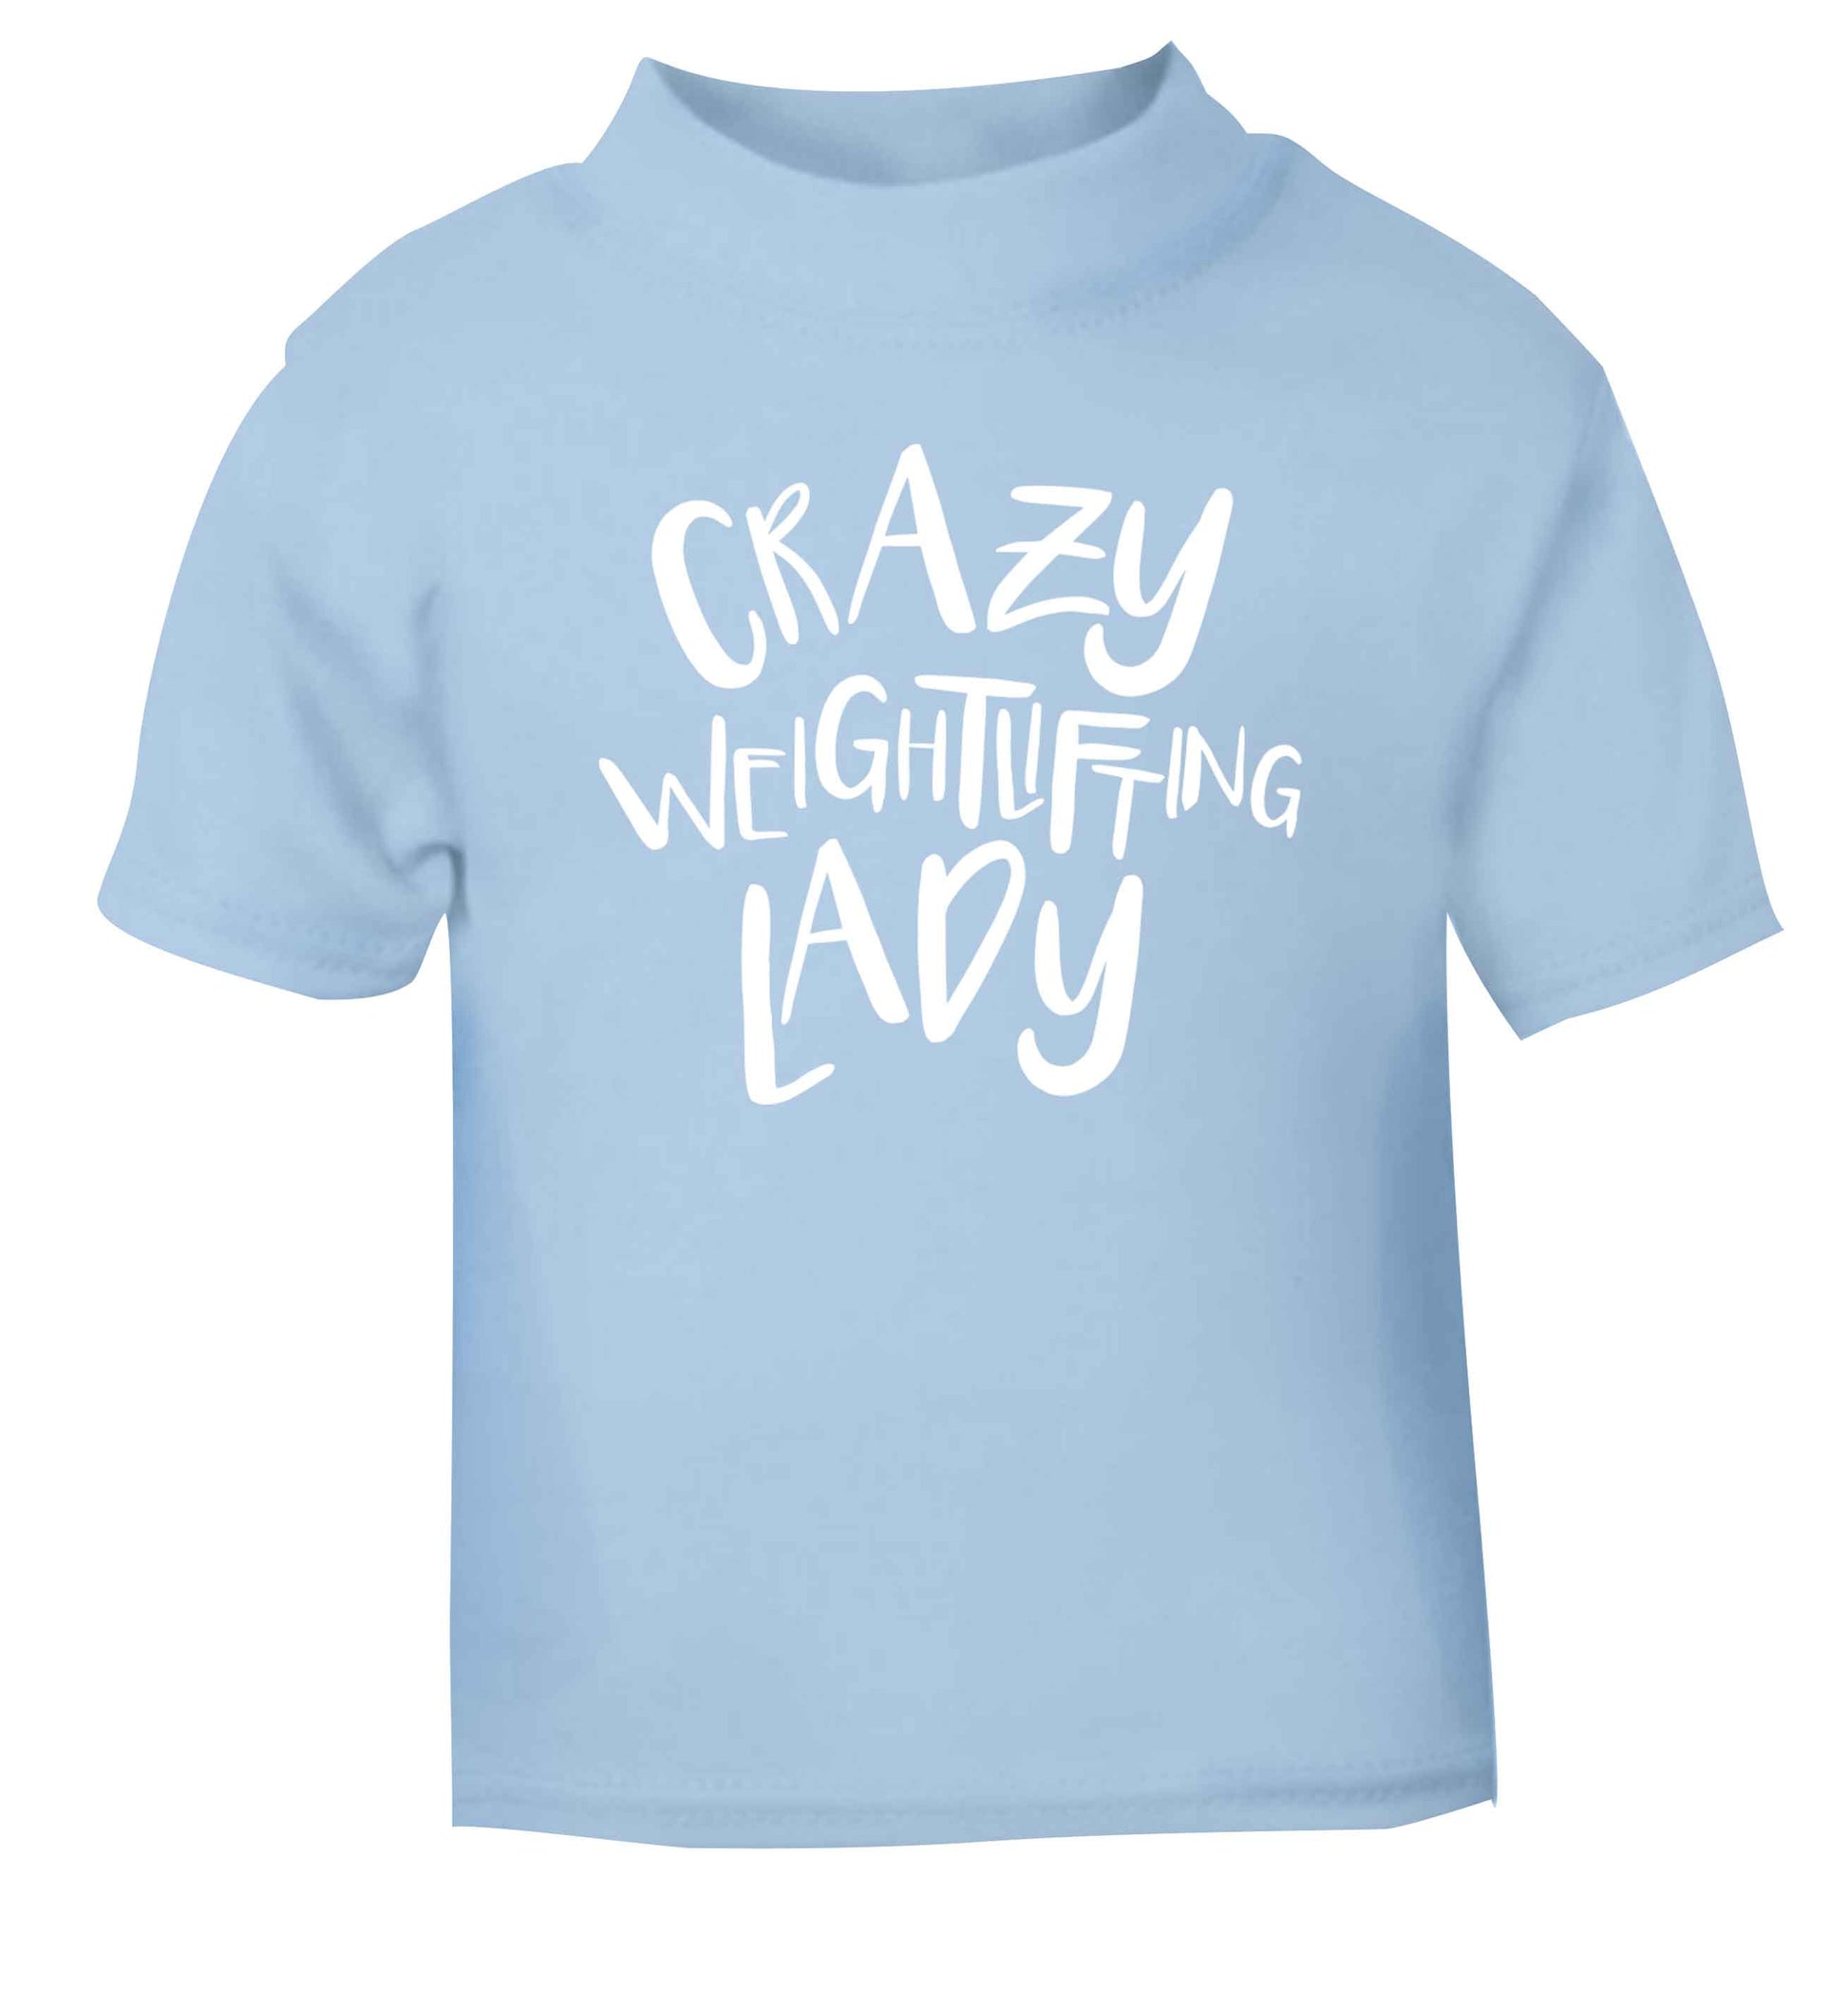 Crazy weightlifting lady light blue Baby Toddler Tshirt 2 Years